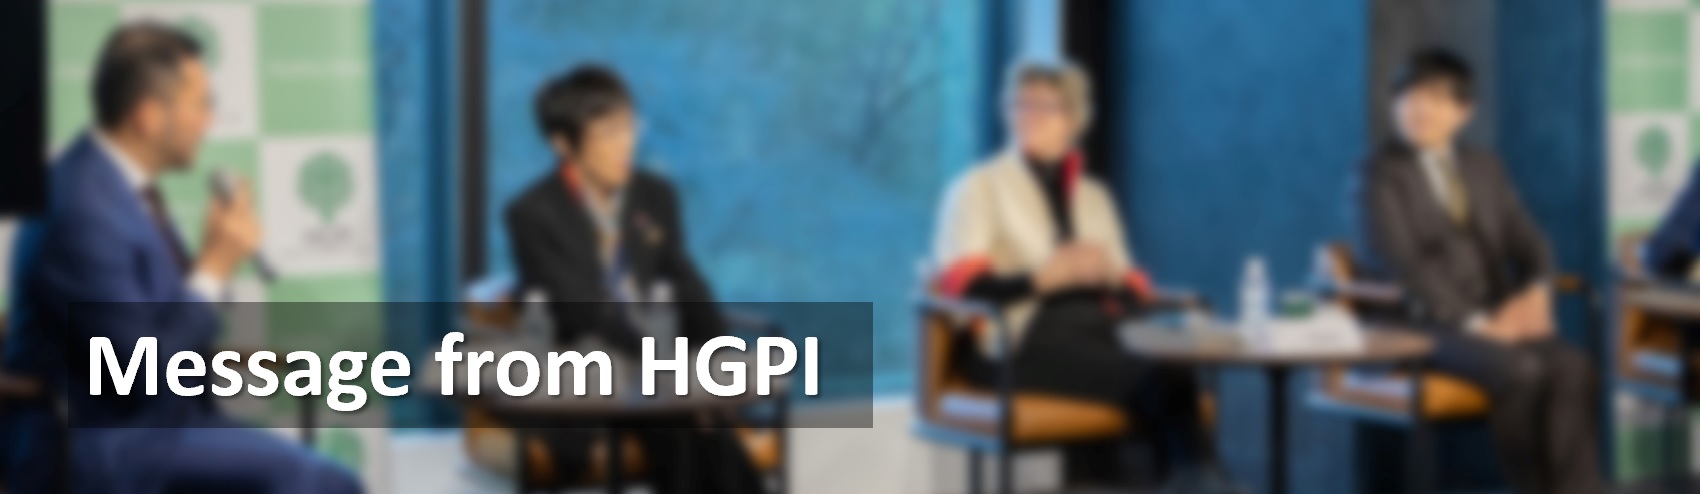 Message from HGPI